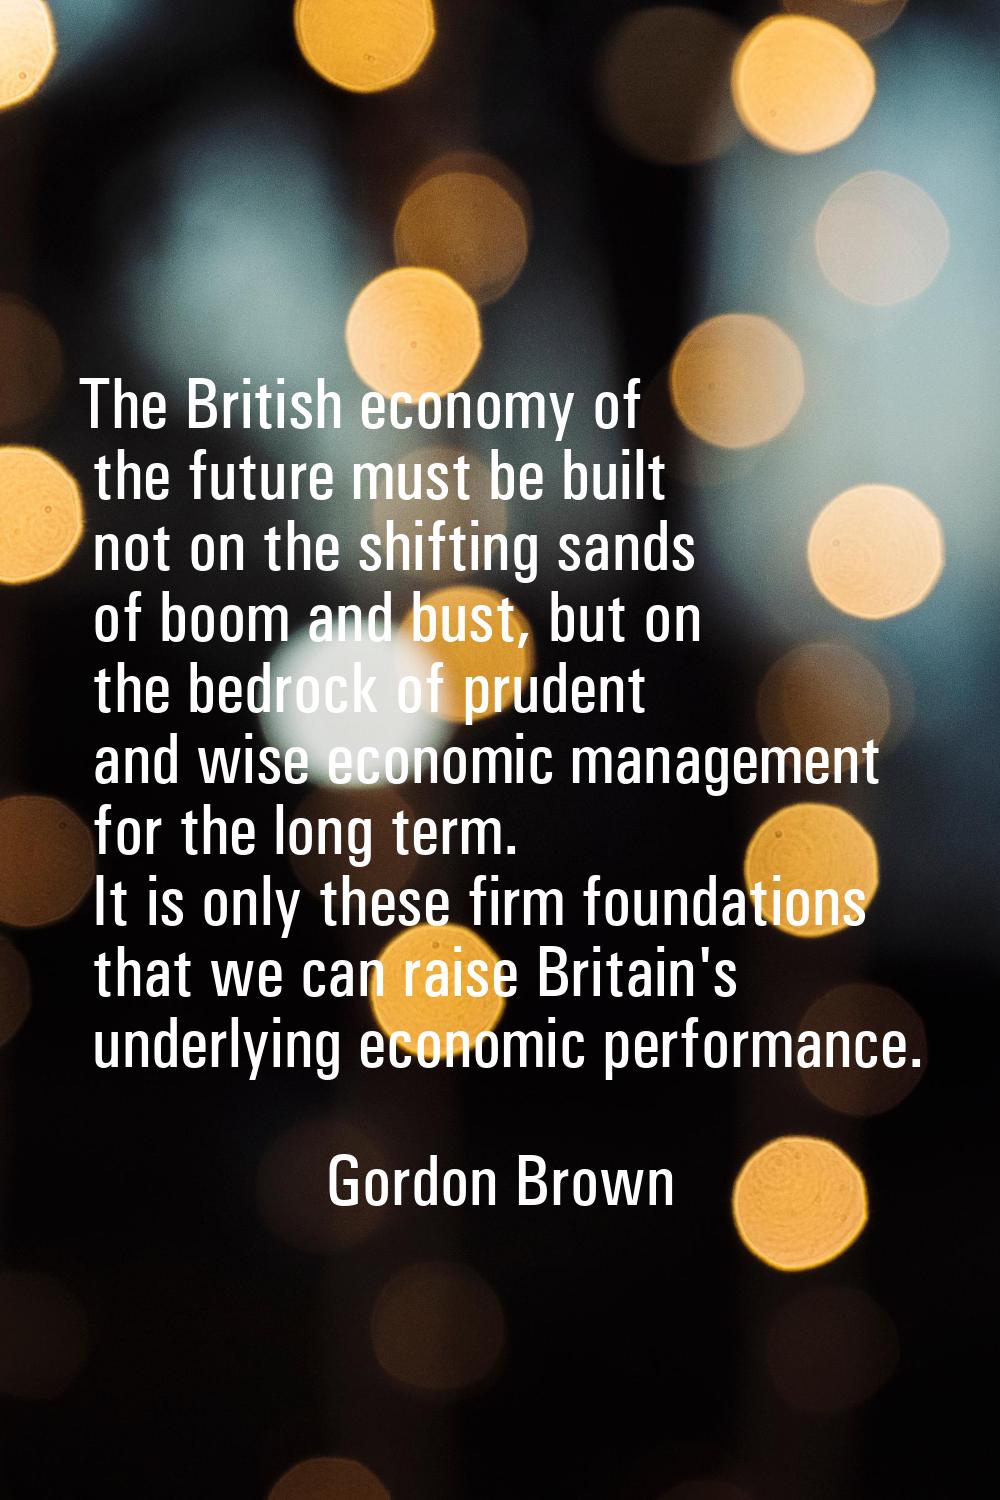 The British economy of the future must be built not on the shifting sands of boom and bust, but on 